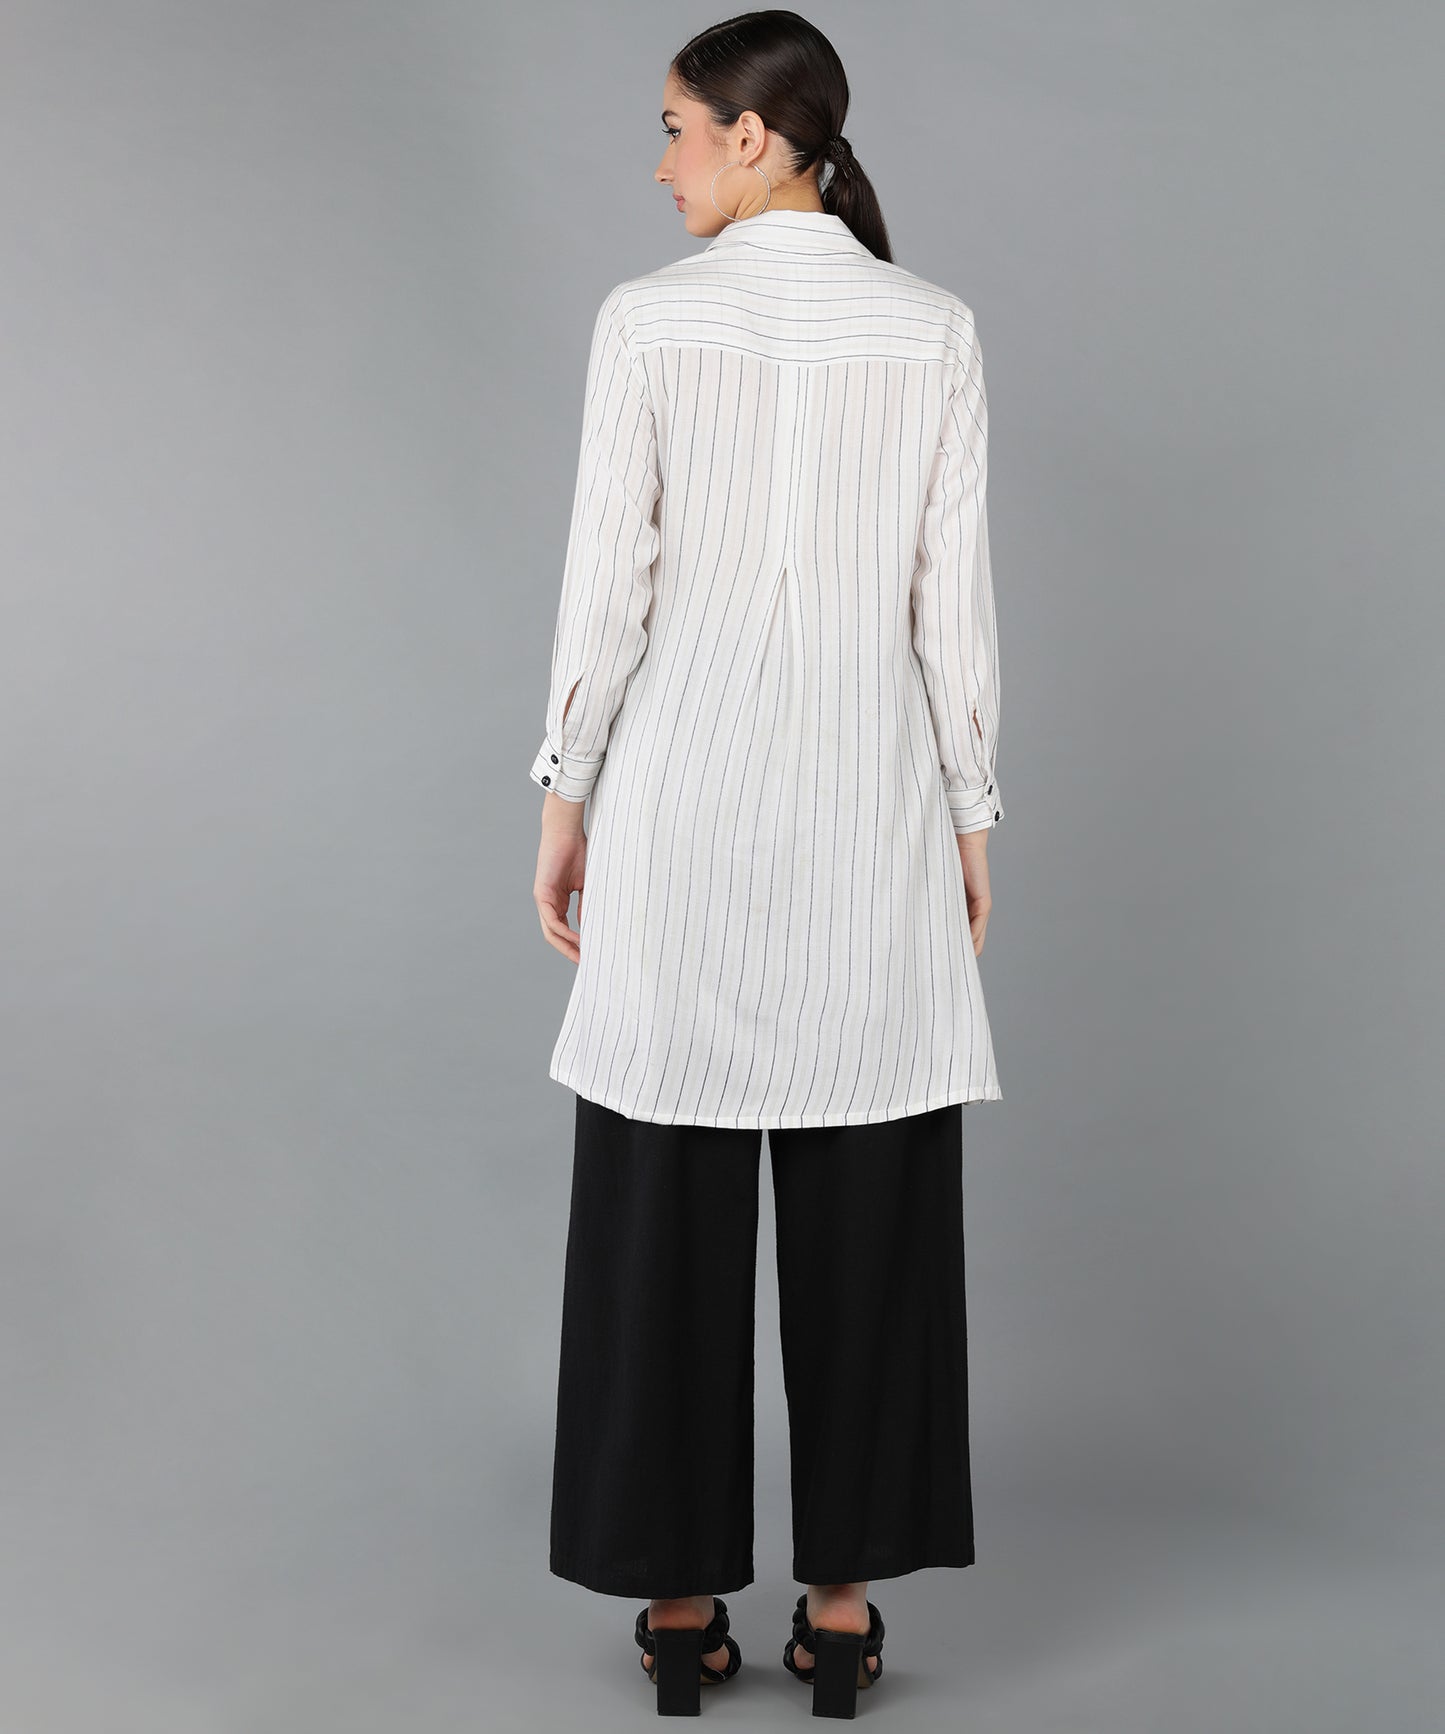 Rayon Solid Embroidered Straight shirt